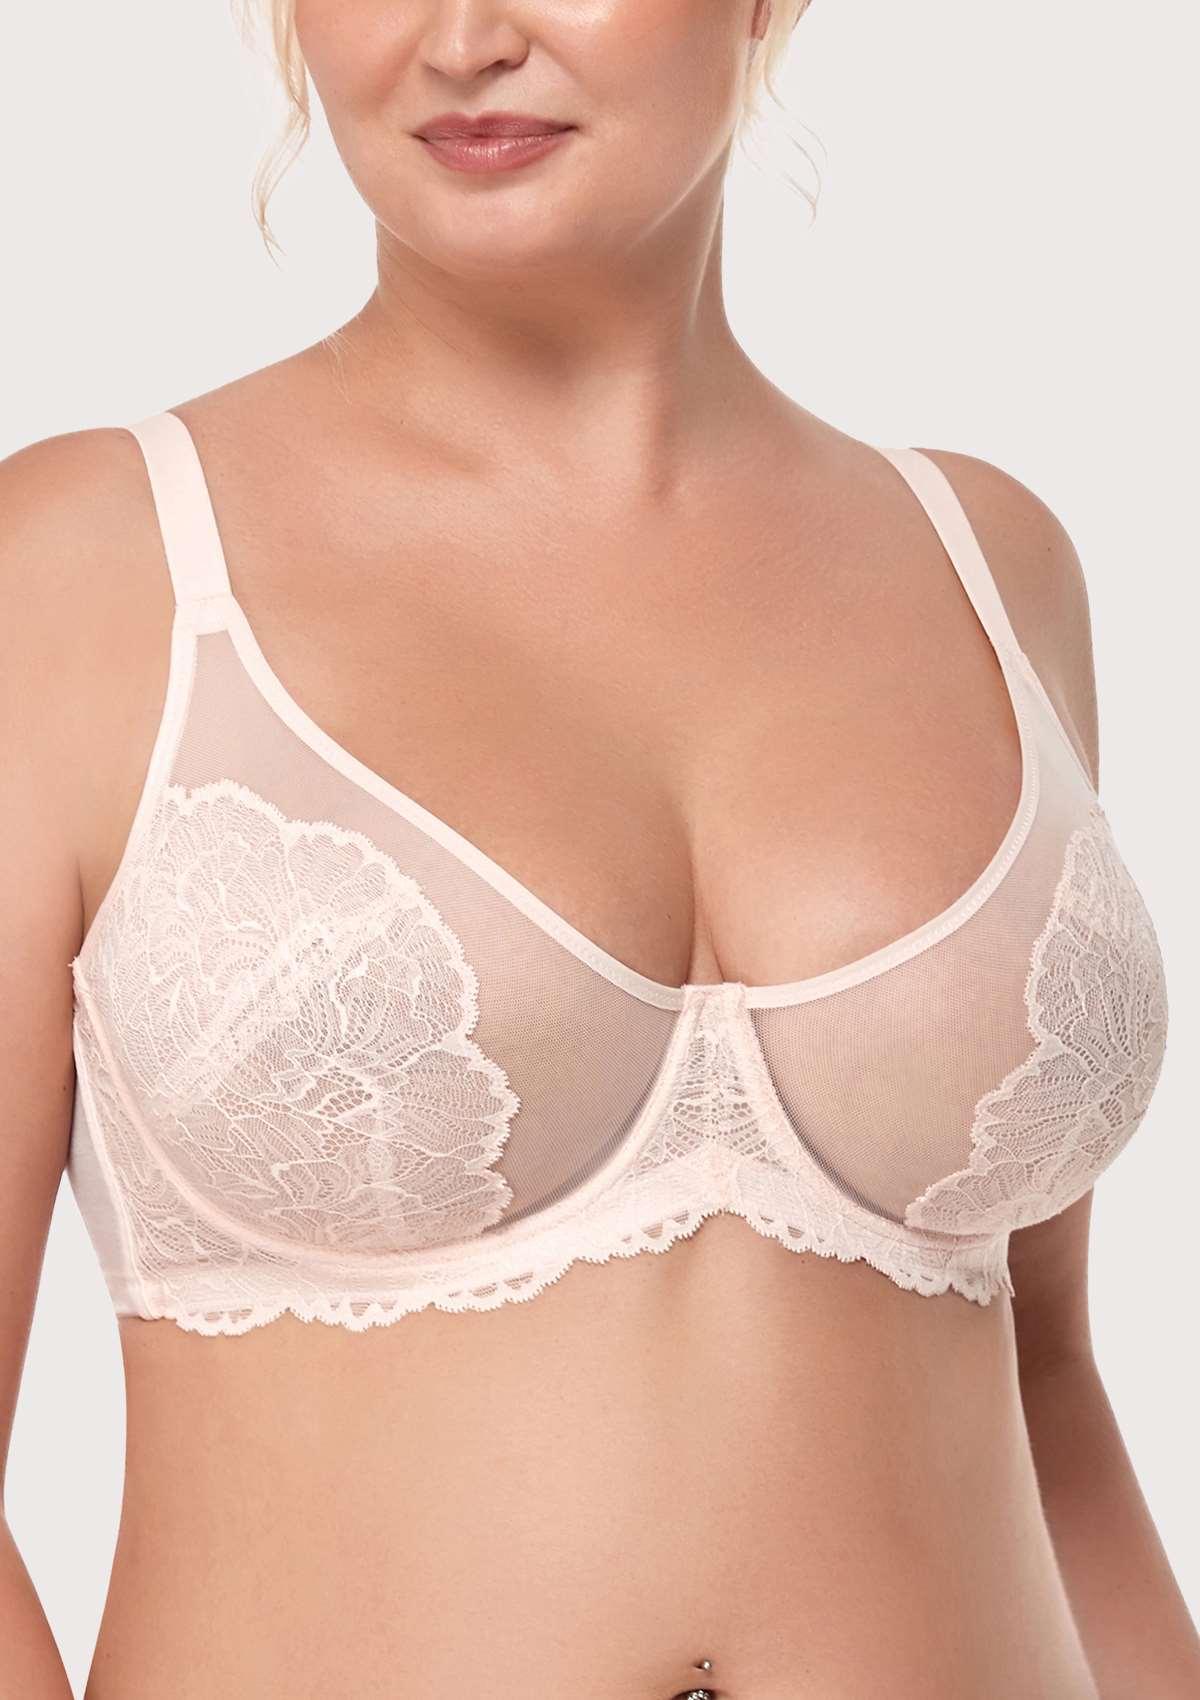 HSIA Blossom Matching Lacey Underwear And Bra Set: Sexy Lace Bra - Dusty Peach / 38 / C